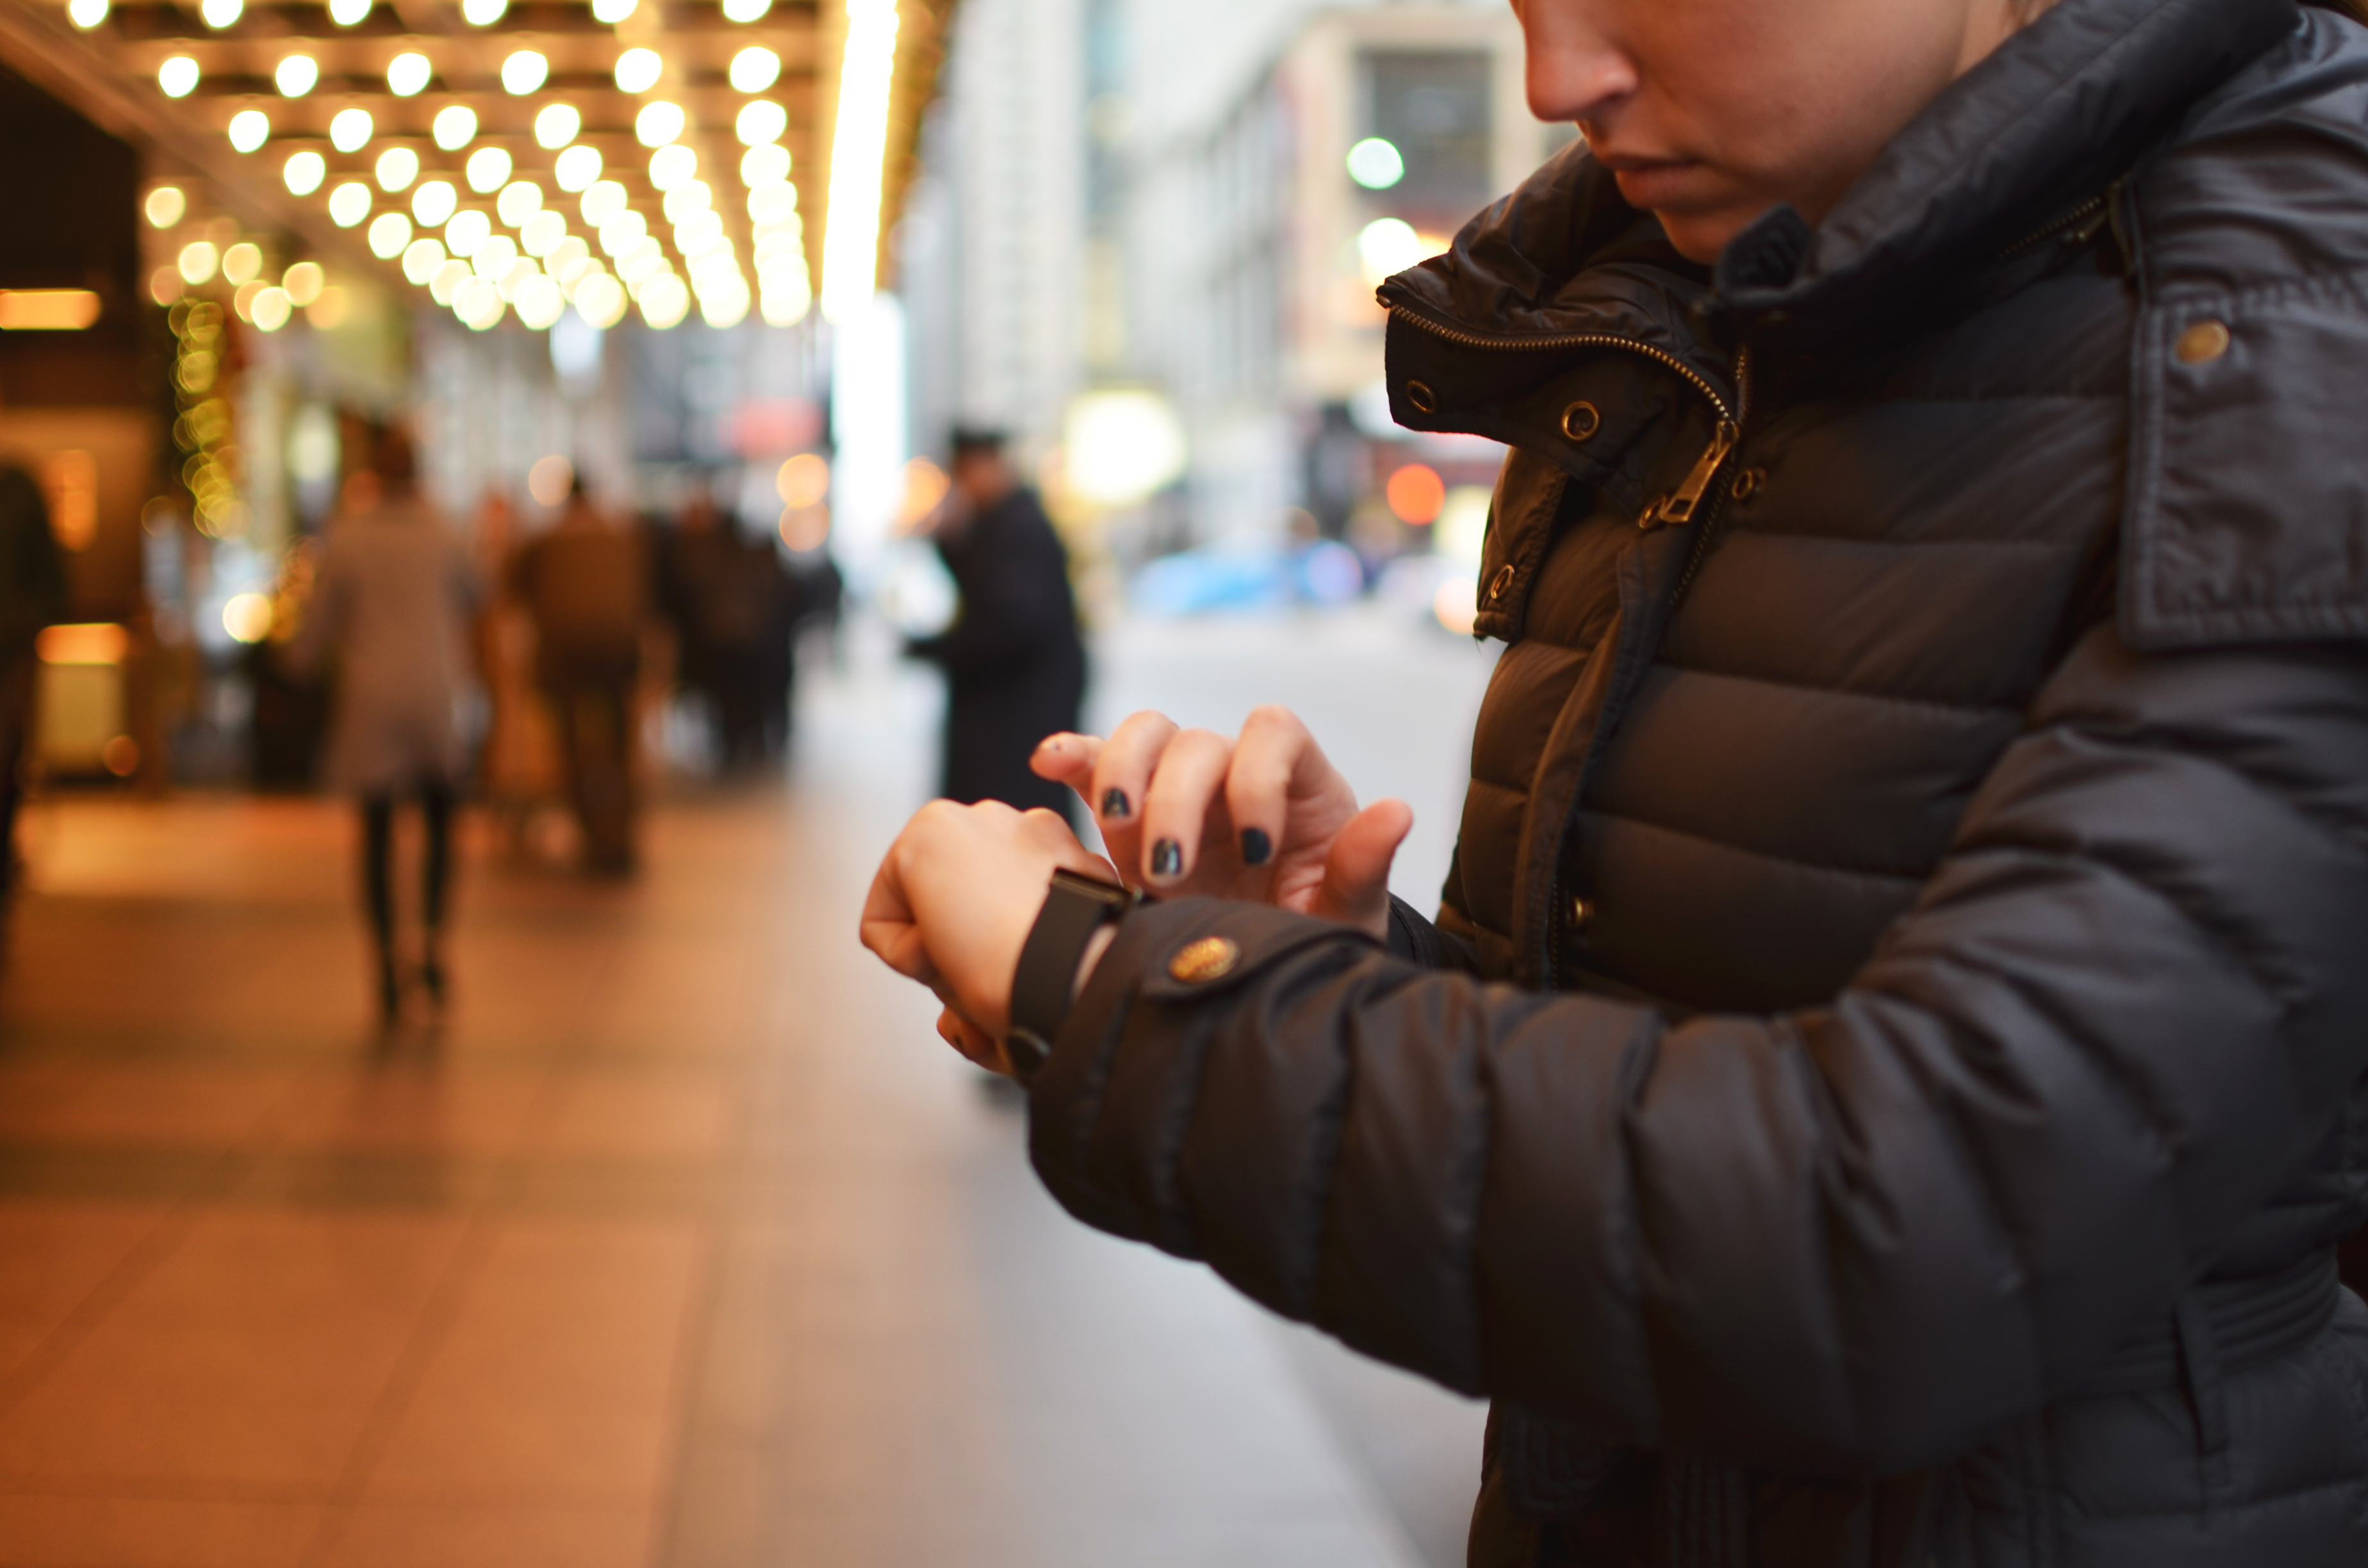 A mobile app isn’t enough: users expect tablet, wearable views